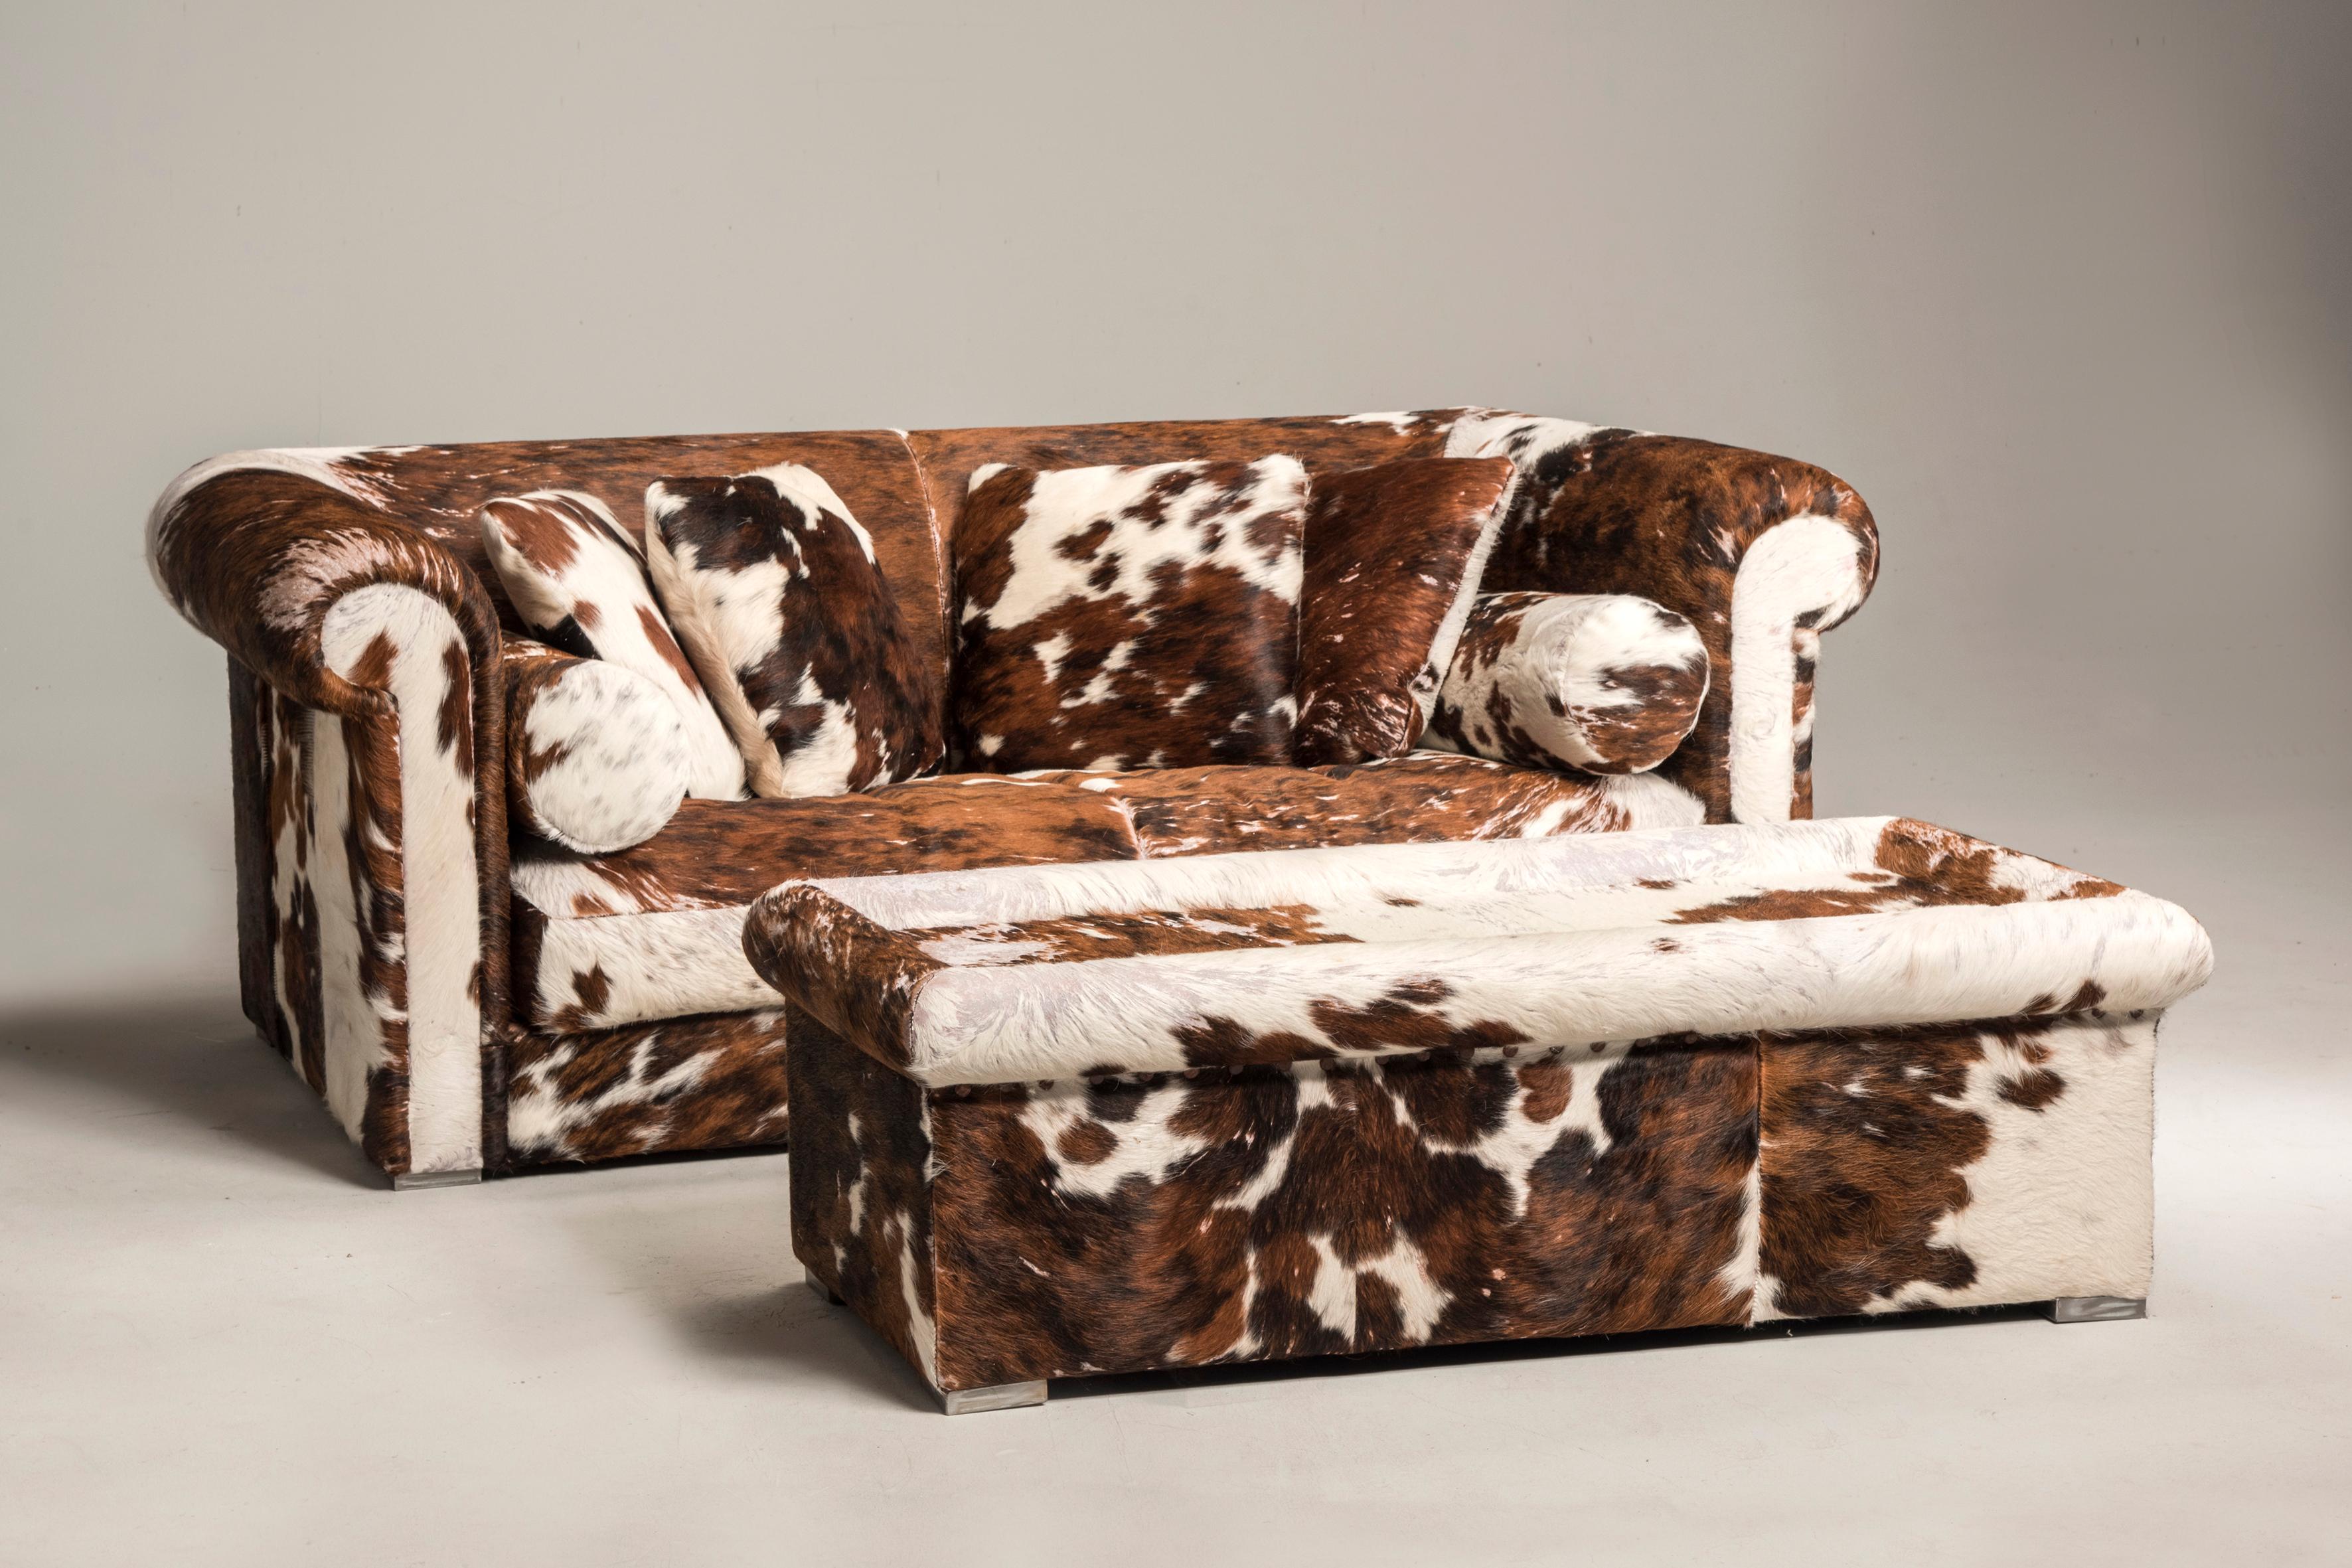 1990s Italian brown and white cow fur leather ottoman by Baxter.

It is upholstered with cow fur leather brown and white color. This kind of pouf is ideal in a very modern space as in a mountain chalet to create immediately a warm and cozy